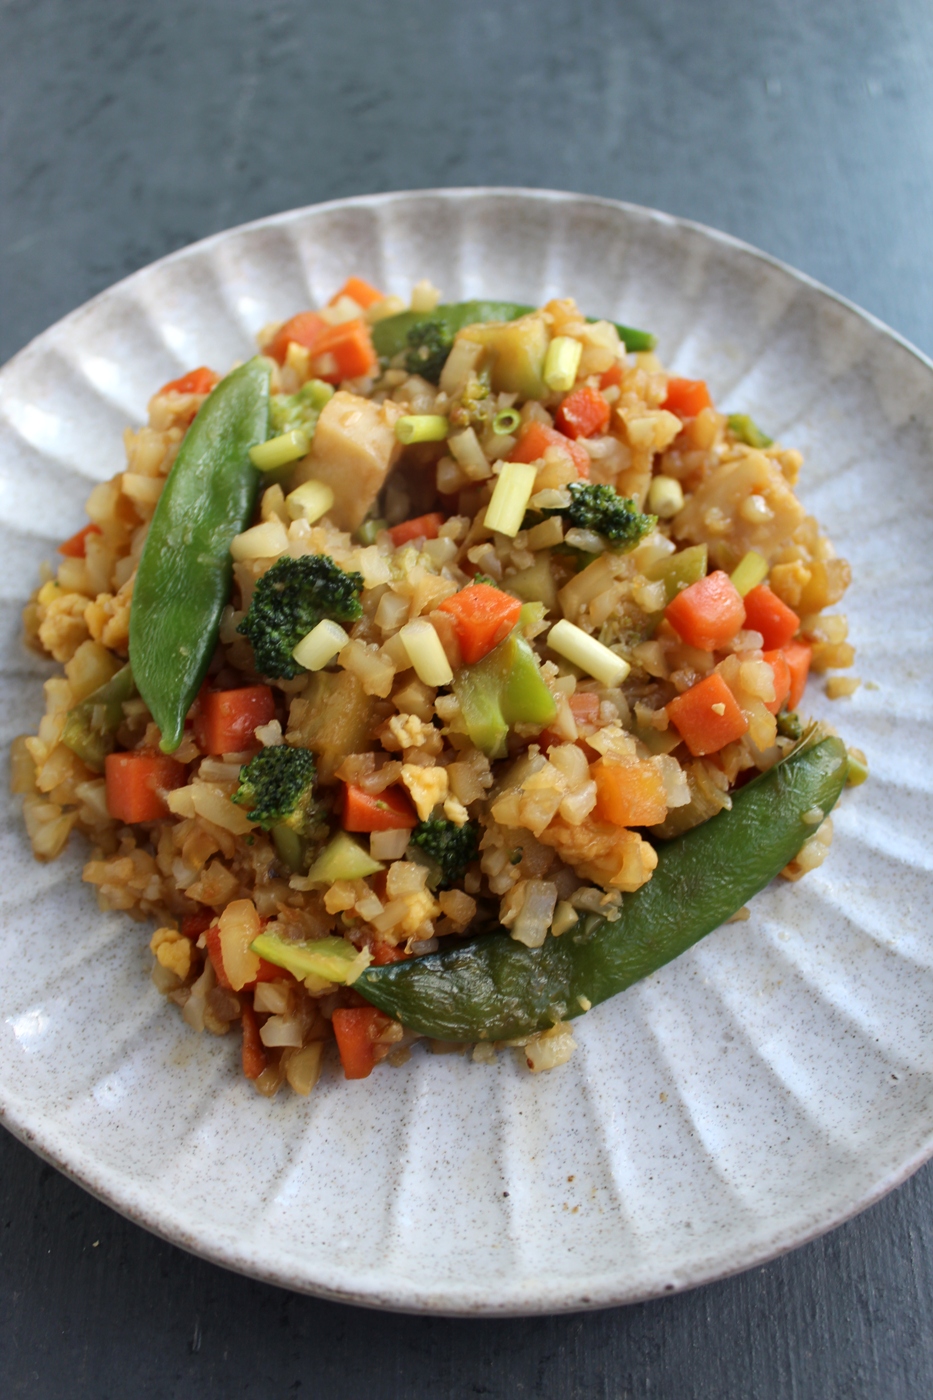 Cauliflower Fried Rice with Chicken uses riced cauliflower instead of rice for extra fiber and vitamins, lots of veggies and is ready in just 15 minutes! www.nutritionistreviews.com